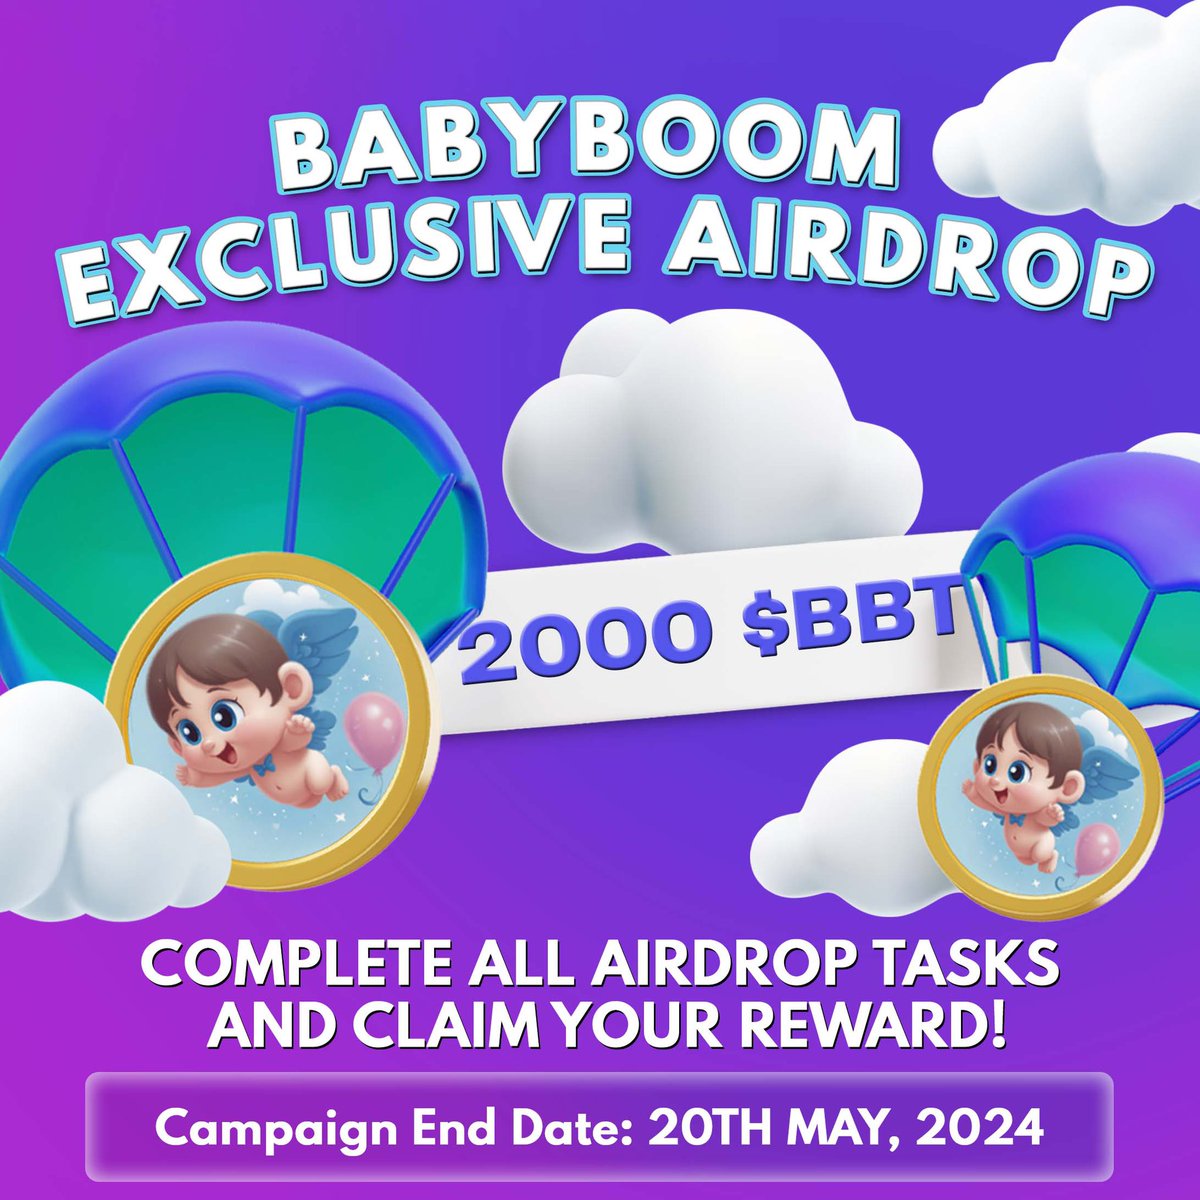 Exclusive airdrop 🚀 

Another massive airdrop is live 

🌟 We're thrilled to announce our exclusive BabyBoom Airdrop for our incredible community members! 

Join us in celebrating by claiming your reward TODAY! 🚀💰

For more details, link 🔗 below
taskon.xyz/campaign/detai…